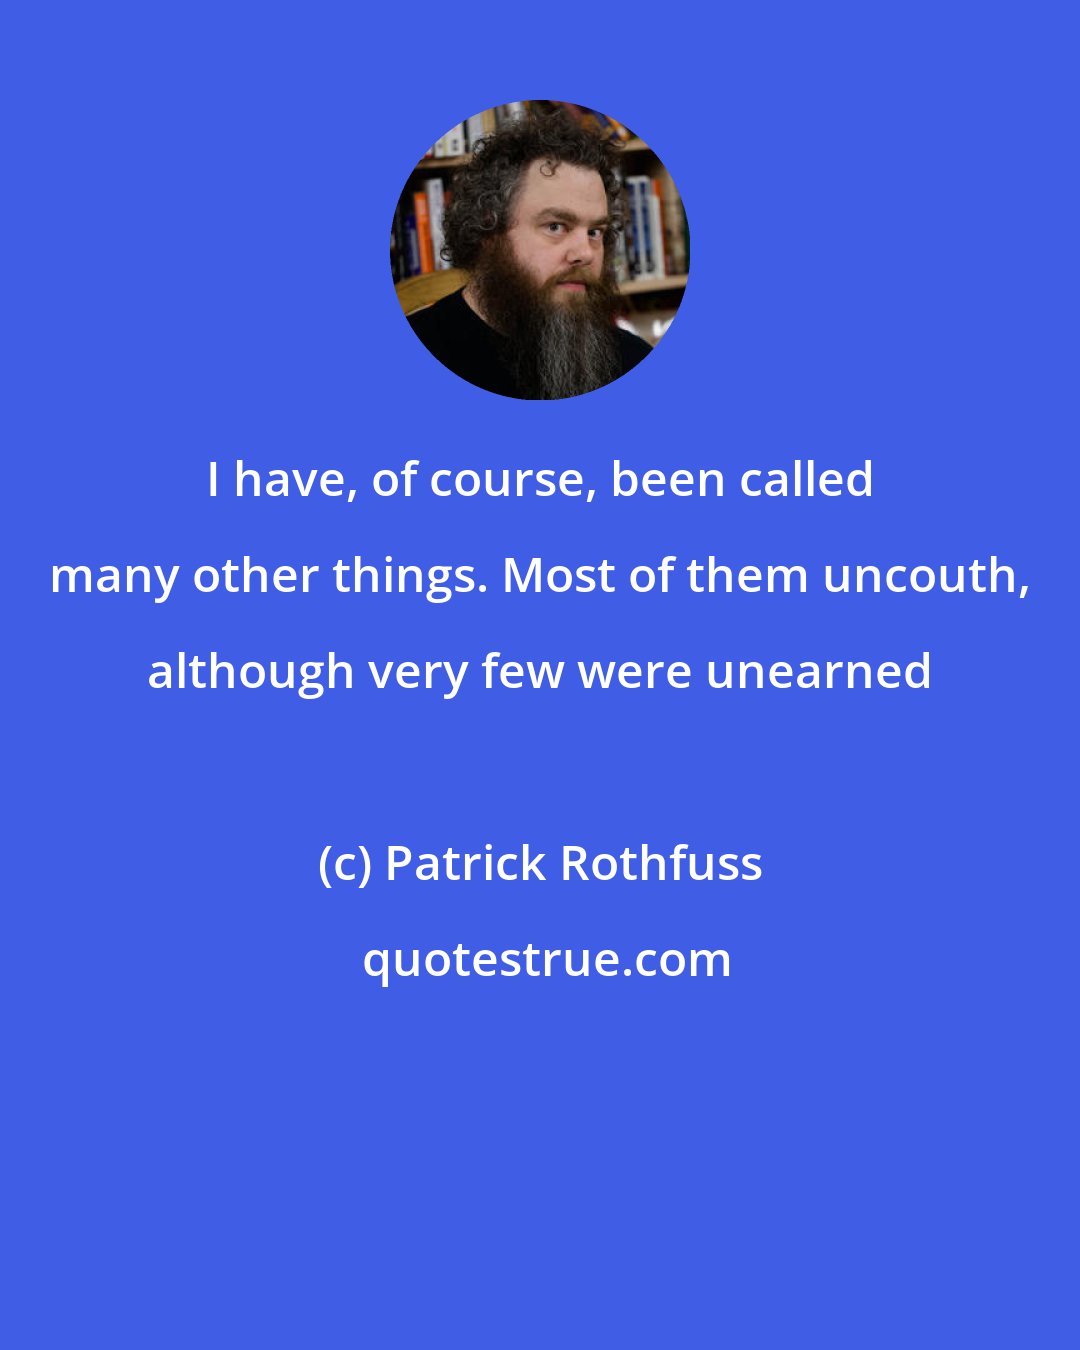 Patrick Rothfuss: I have, of course, been called many other things. Most of them uncouth, although very few were unearned